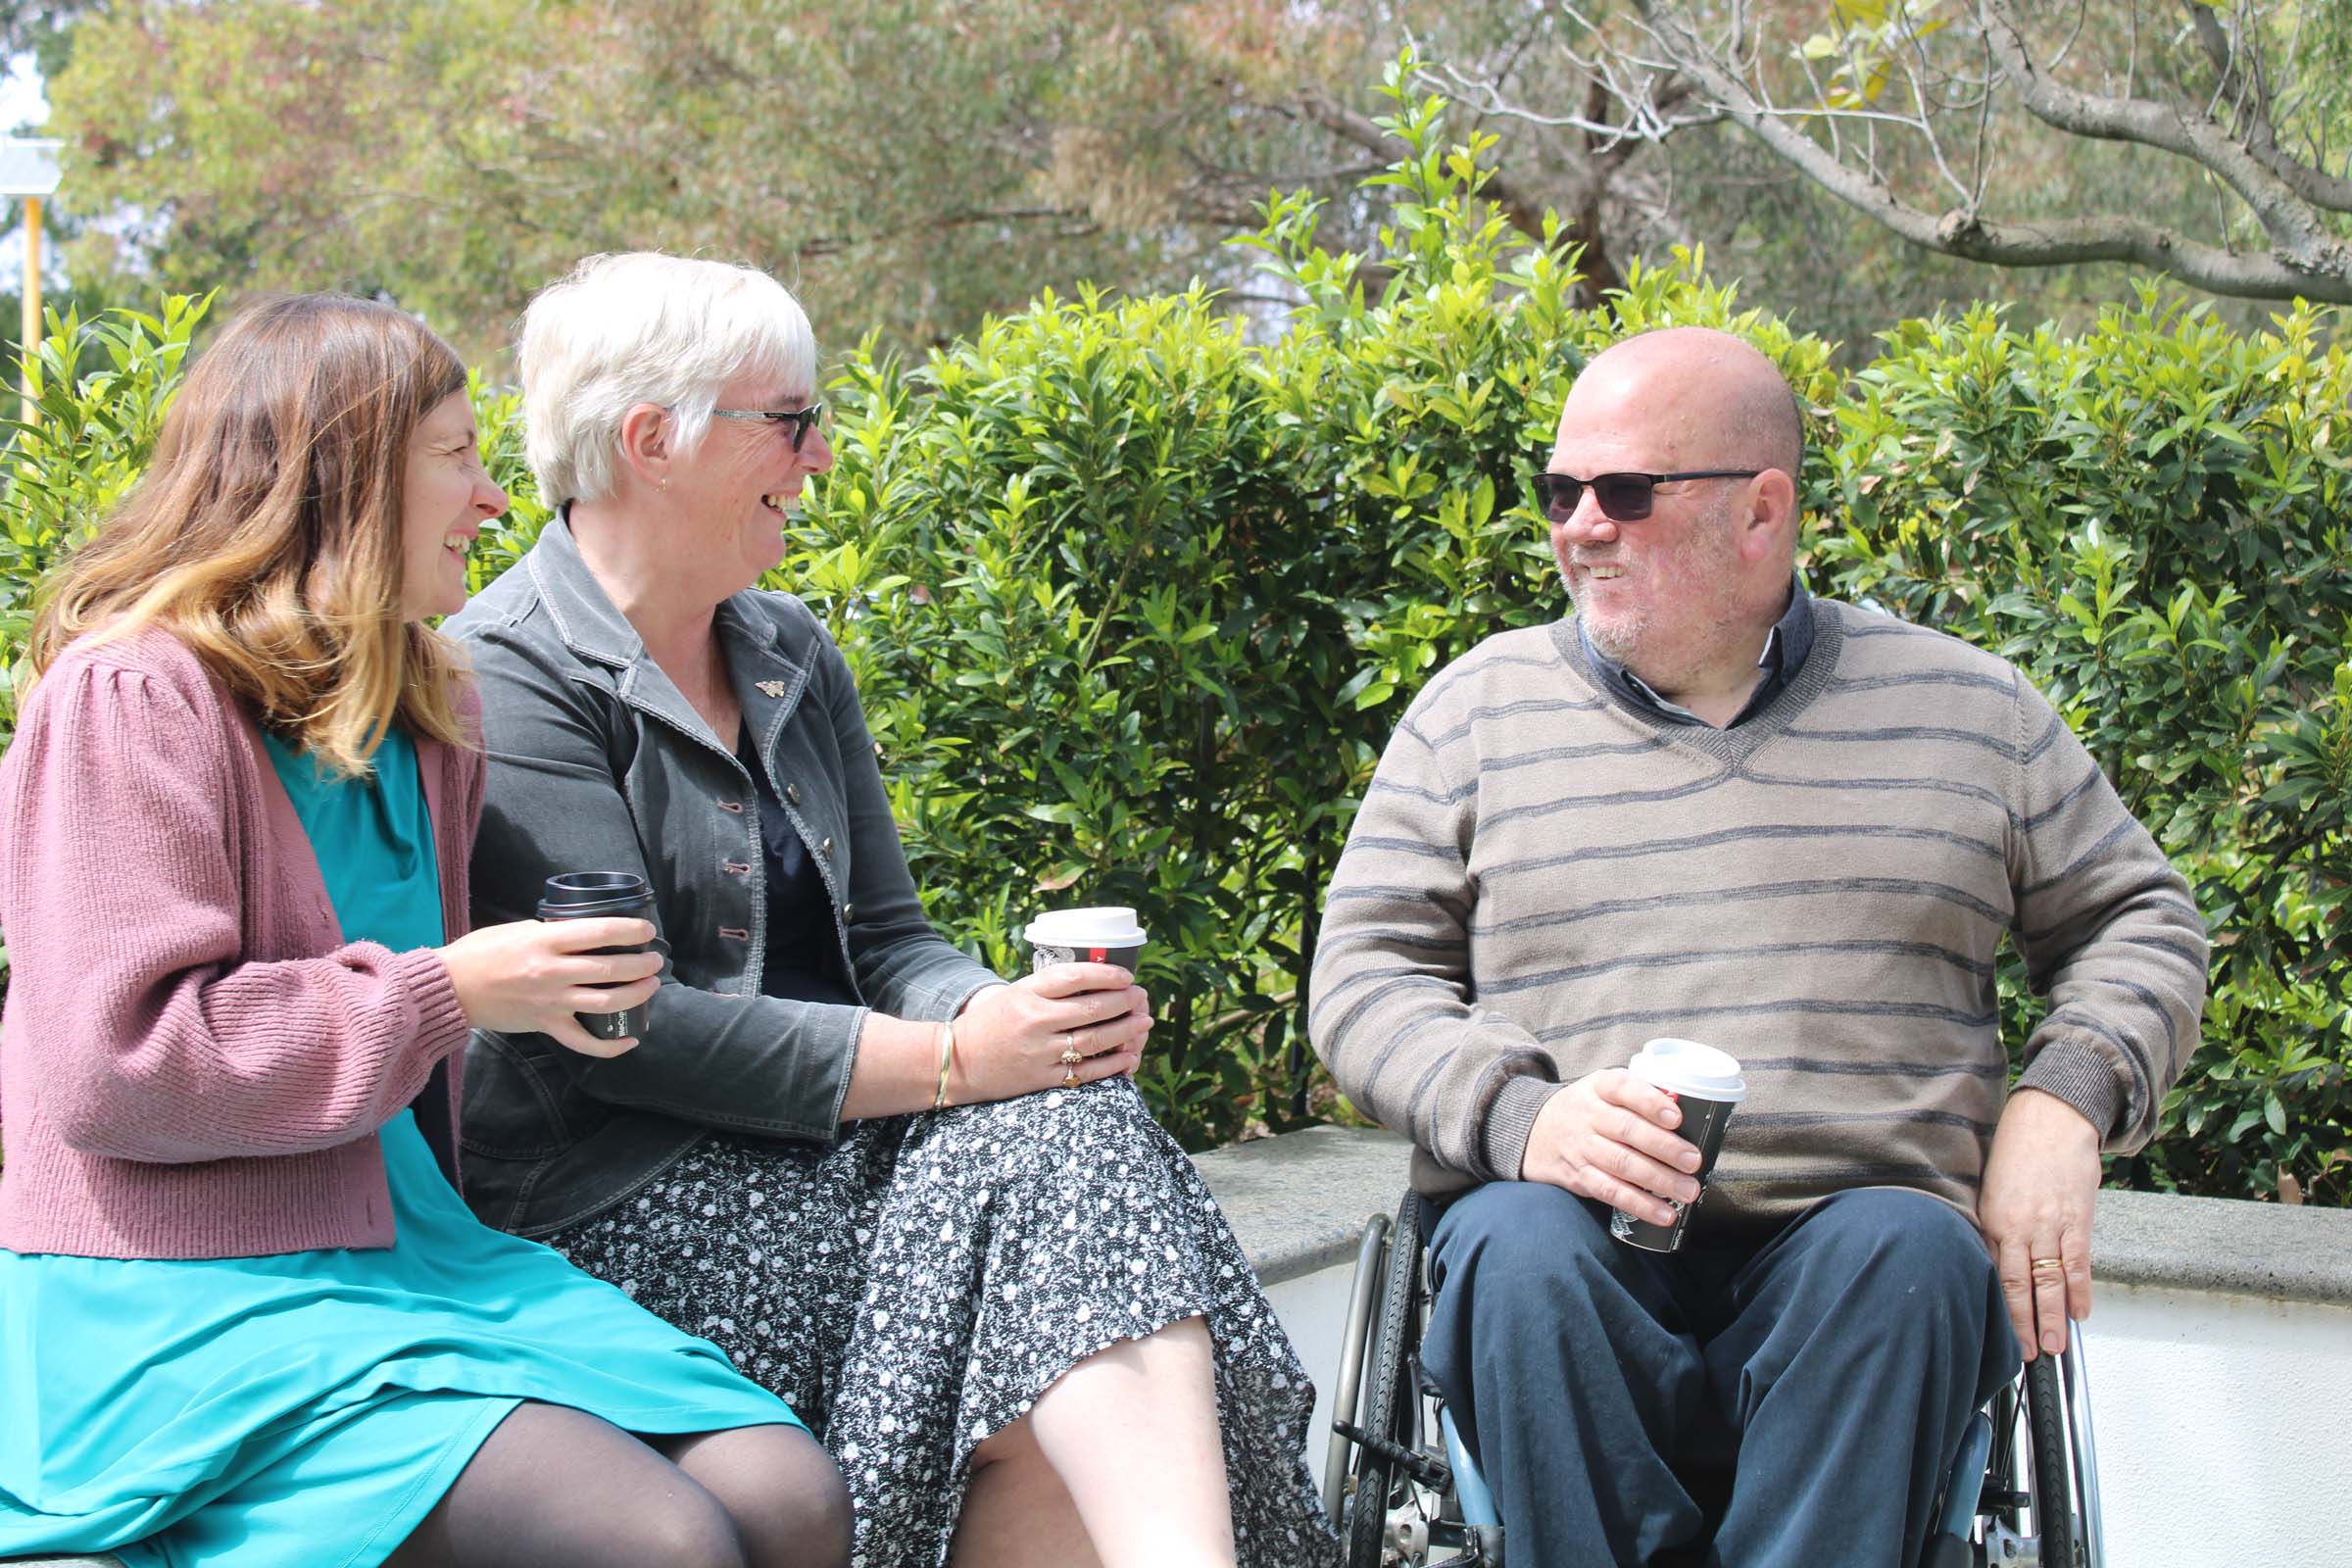 Two women are seated on a low stone wall beside a man seated in his wheelchair. They are all holding cups of coffee while smiling and laughing.